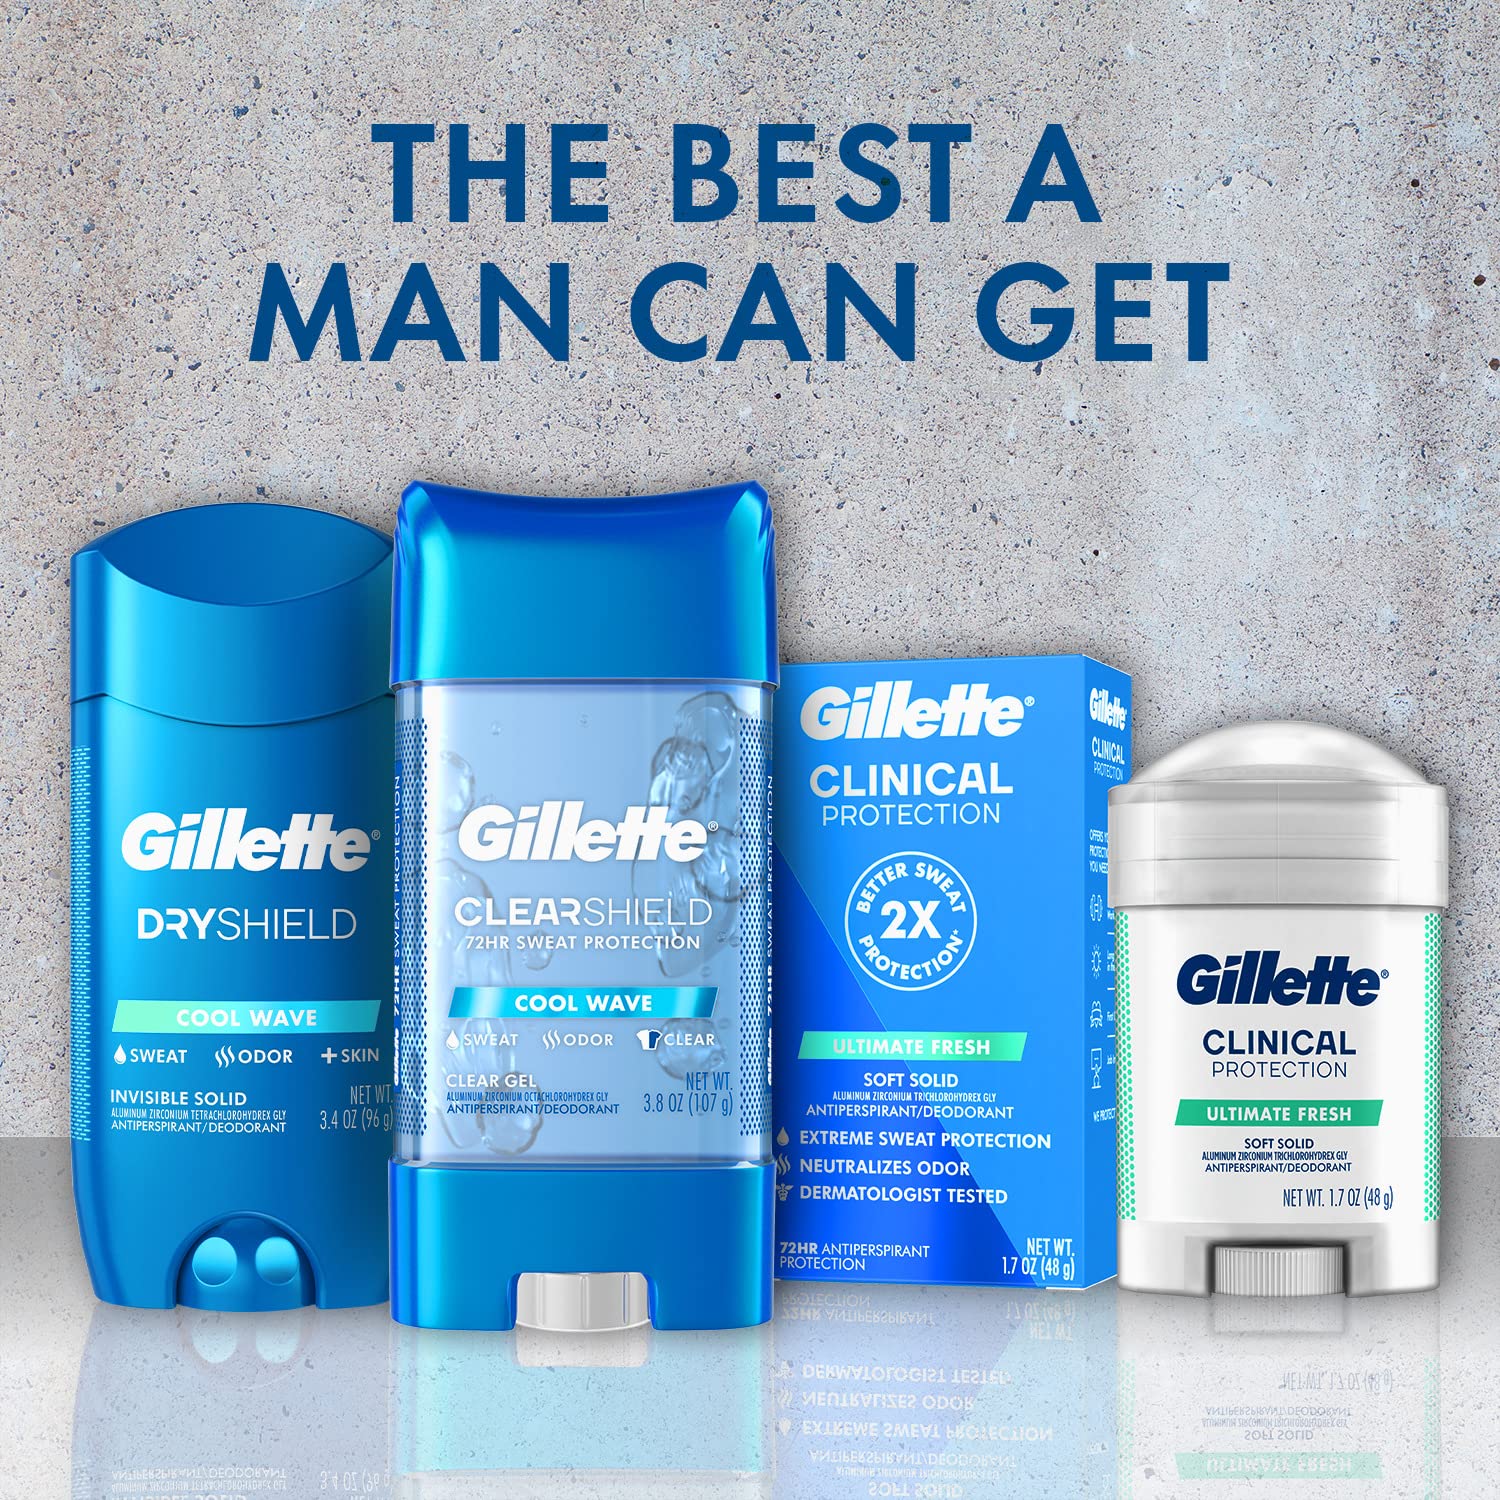 Gillette Men’s Clinical Strength Antiperspirant and Deodorant, 72-Hour Sweat Protection, Ultimate Fresh Soft Solid, 1 Clinical Brand For Men, 1.7 oz (Pack of 3)